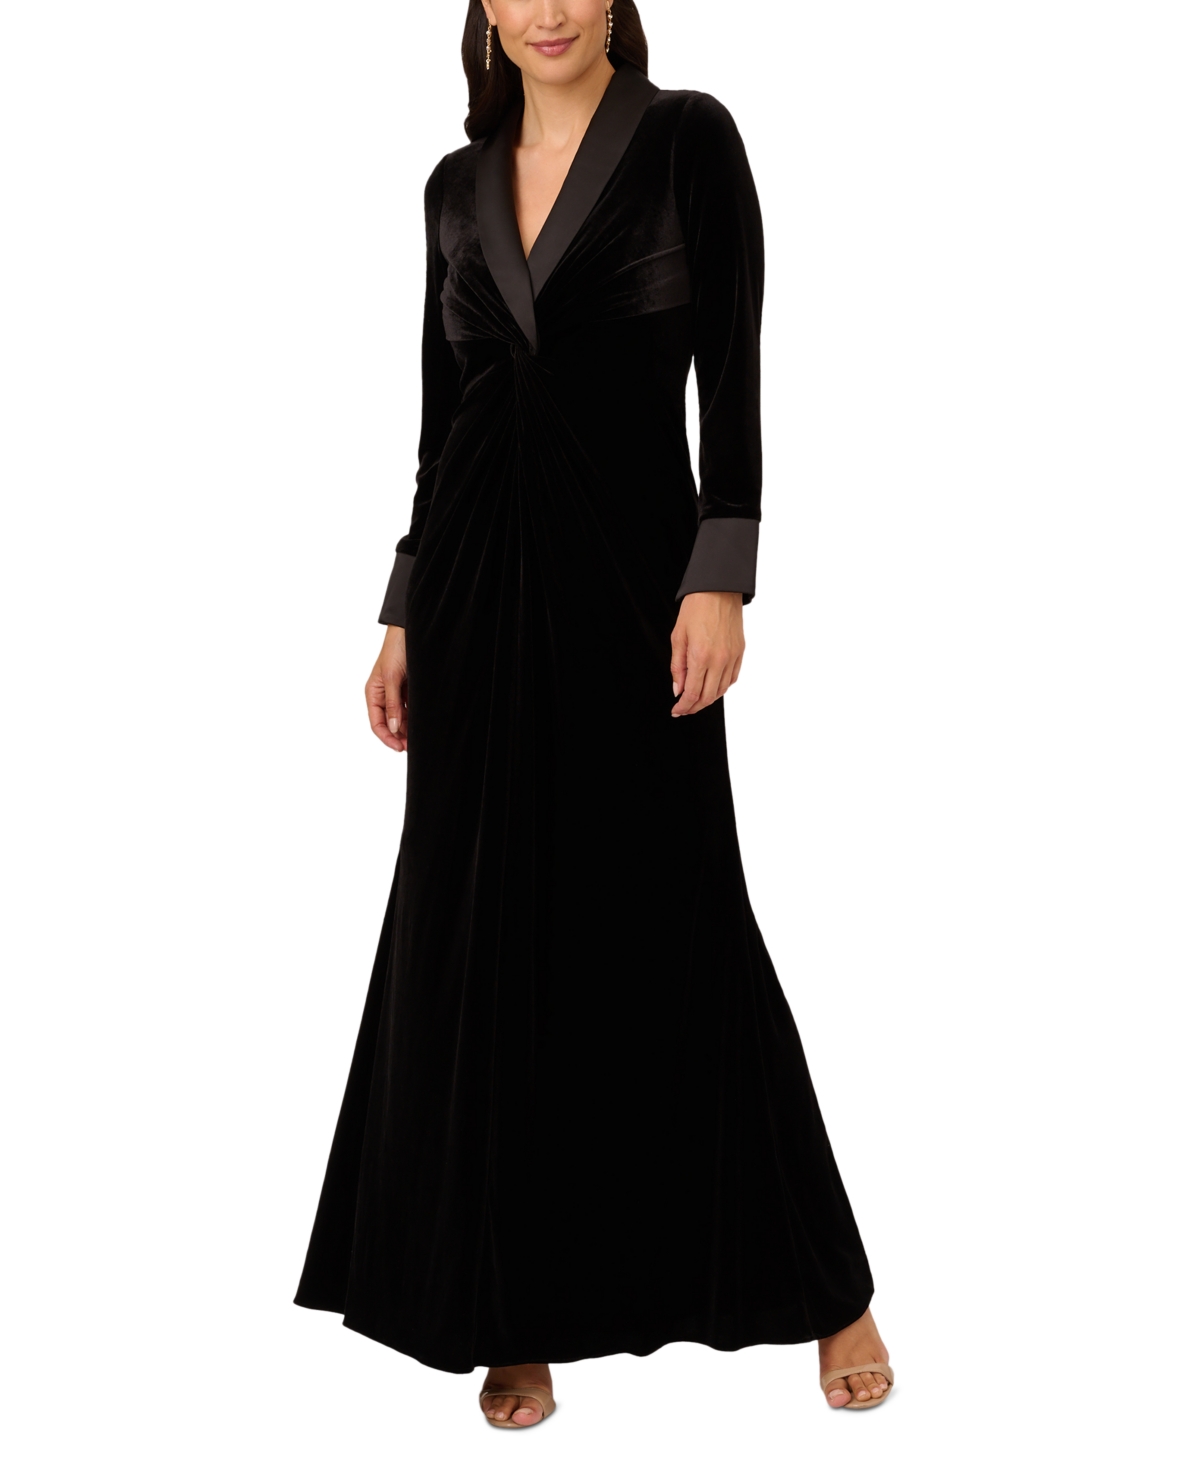 1950s History of Prom, Party, Evening and Formal Dresses Adrianna Papell Womens Velvet Twist-Front Tuxedo Gown - Black $219.00 AT vintagedancer.com